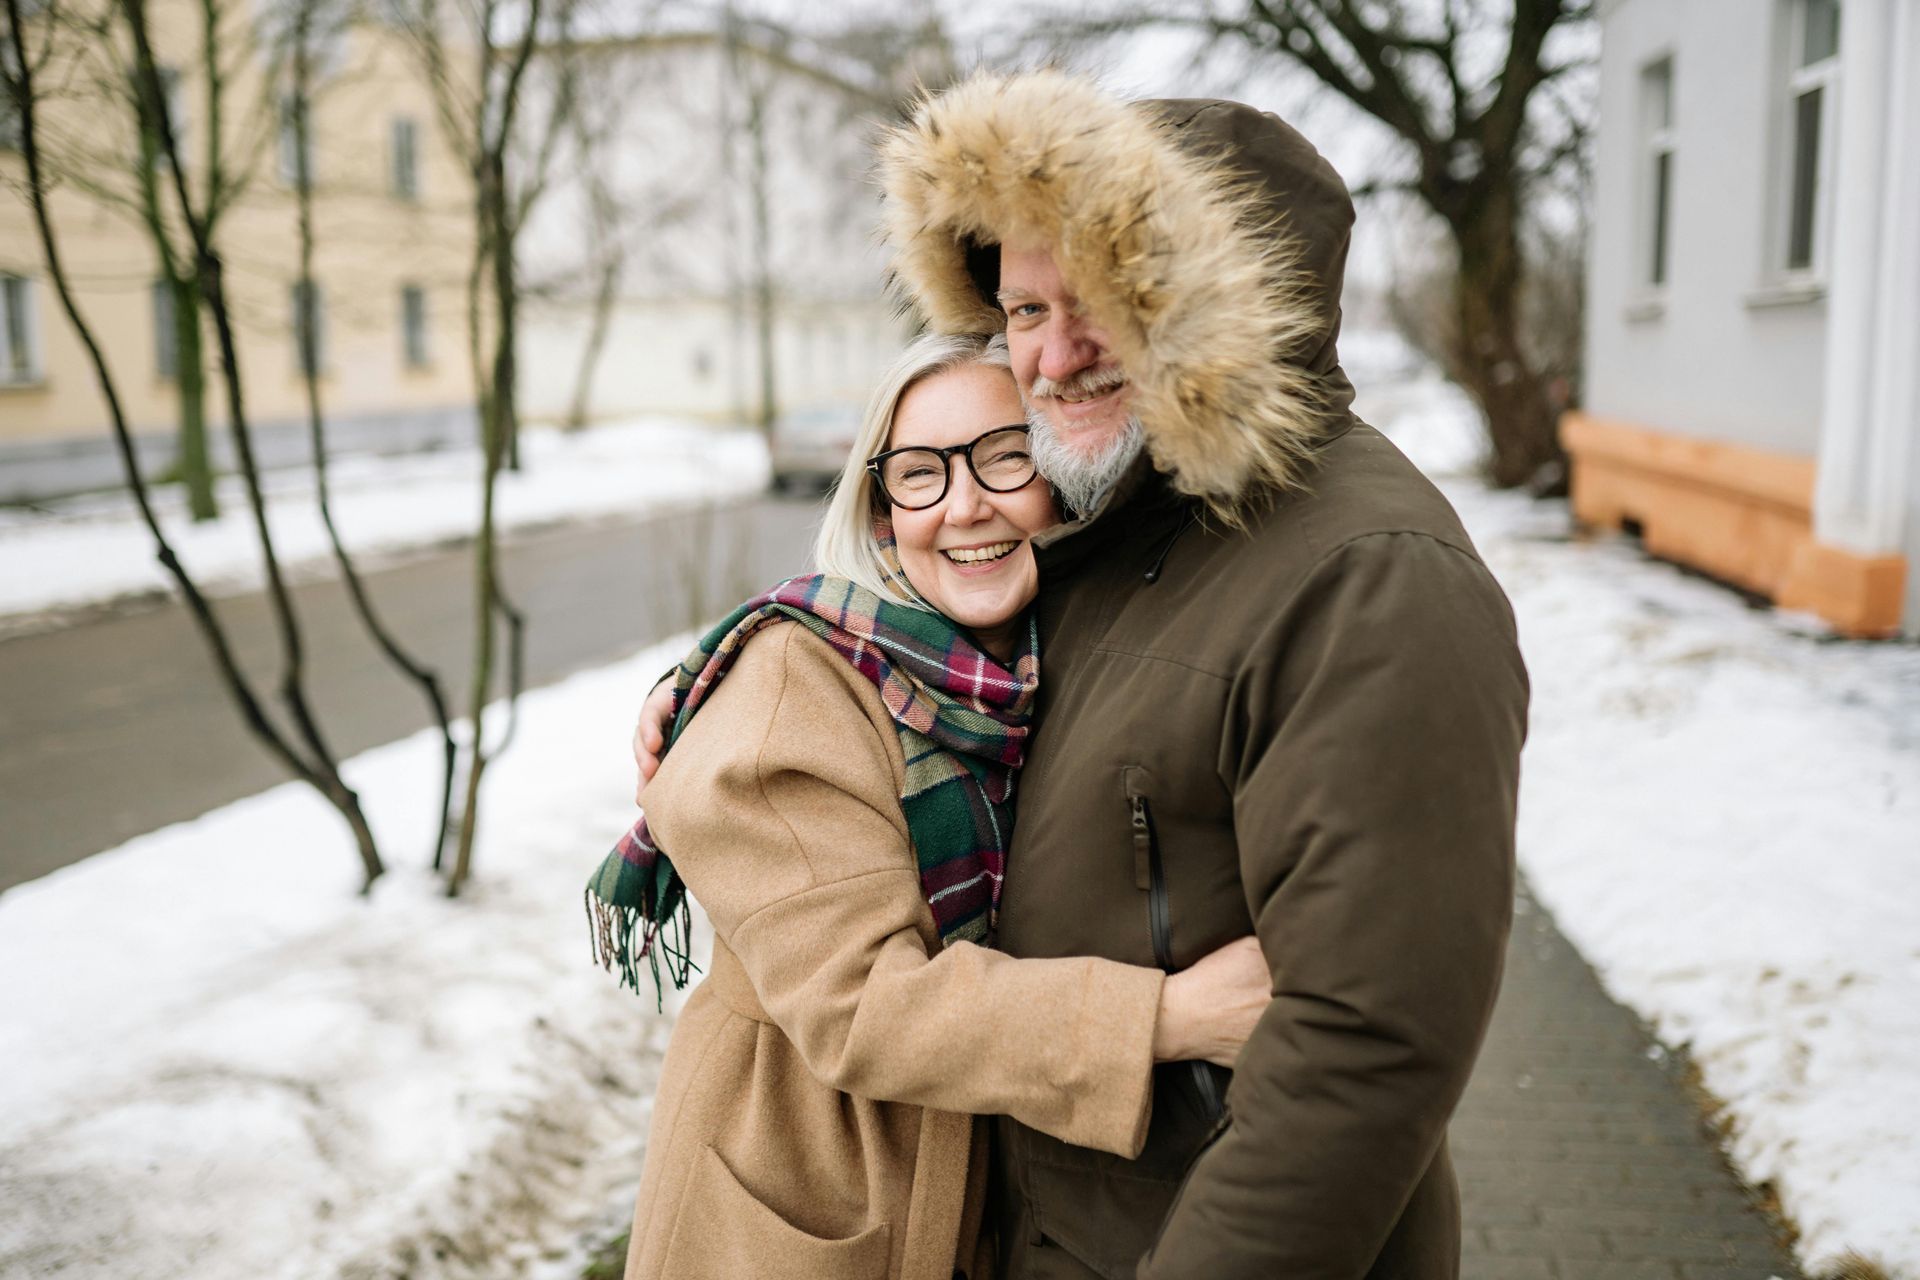 A man and a woman are hugging each other in the snow.